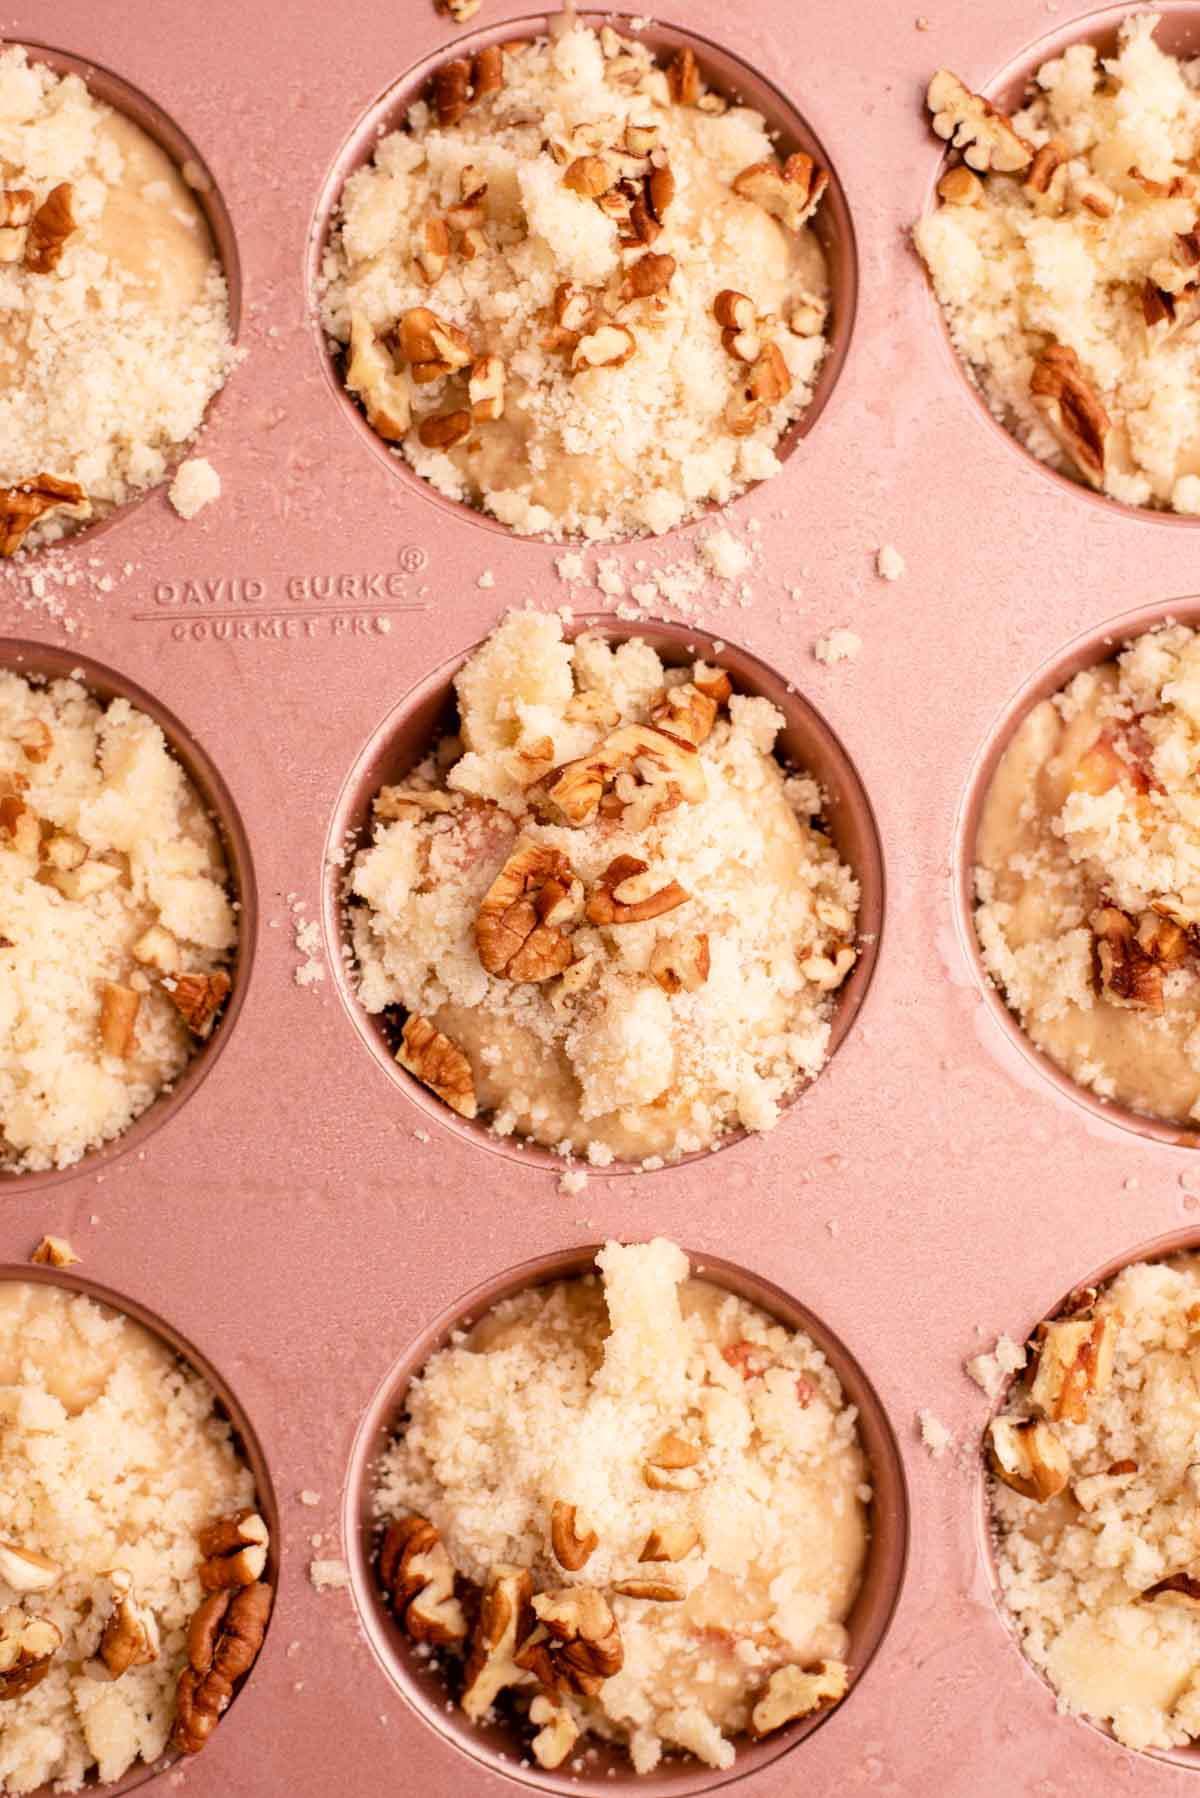 Unbaked muffins topped with crumb topping and pecans in pink muffin tin